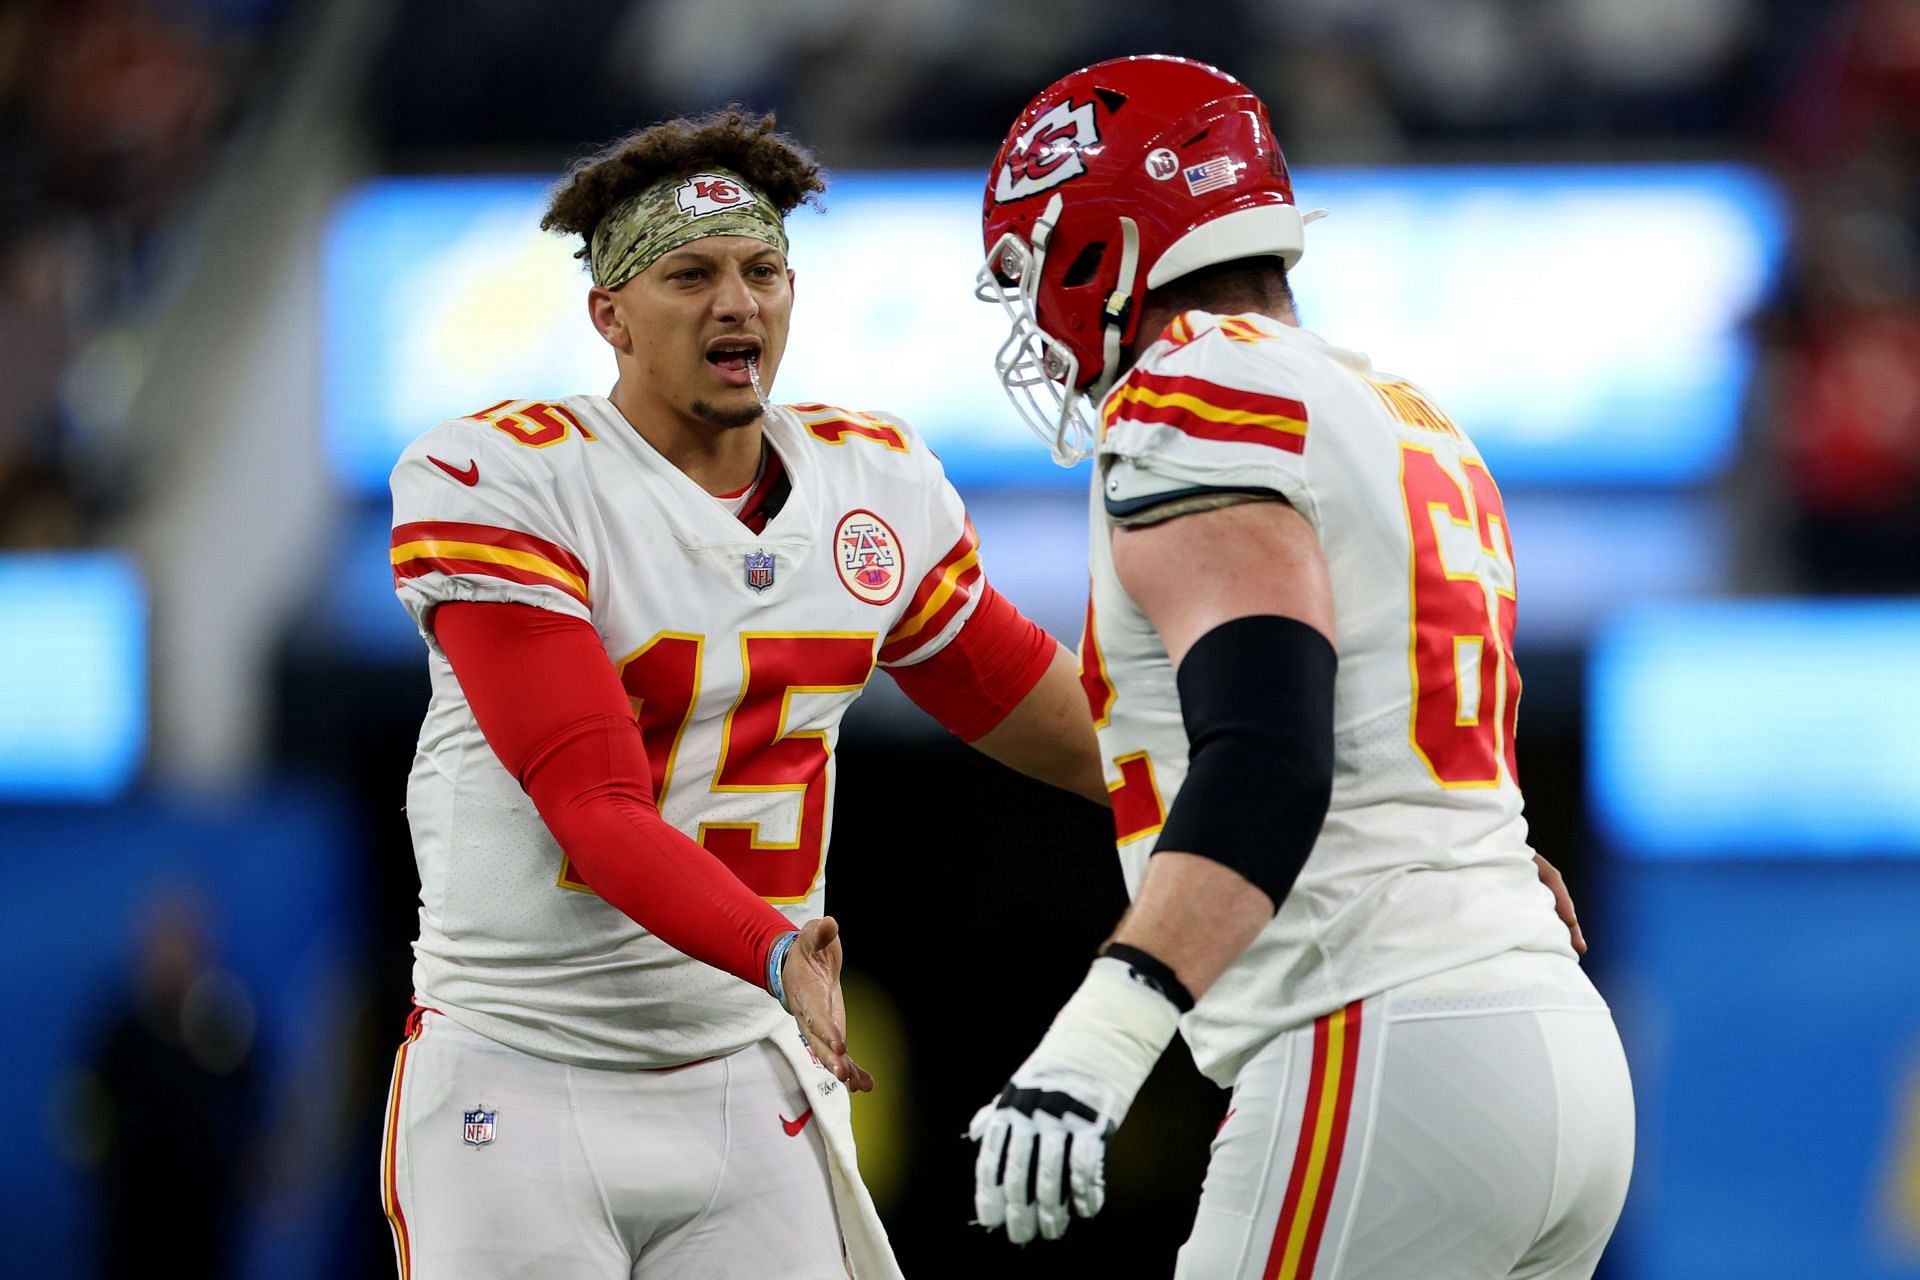 Chiefs' Patrick Mahomes: 'I just haven't played very good' amid 3-1 start  to season – KGET 17